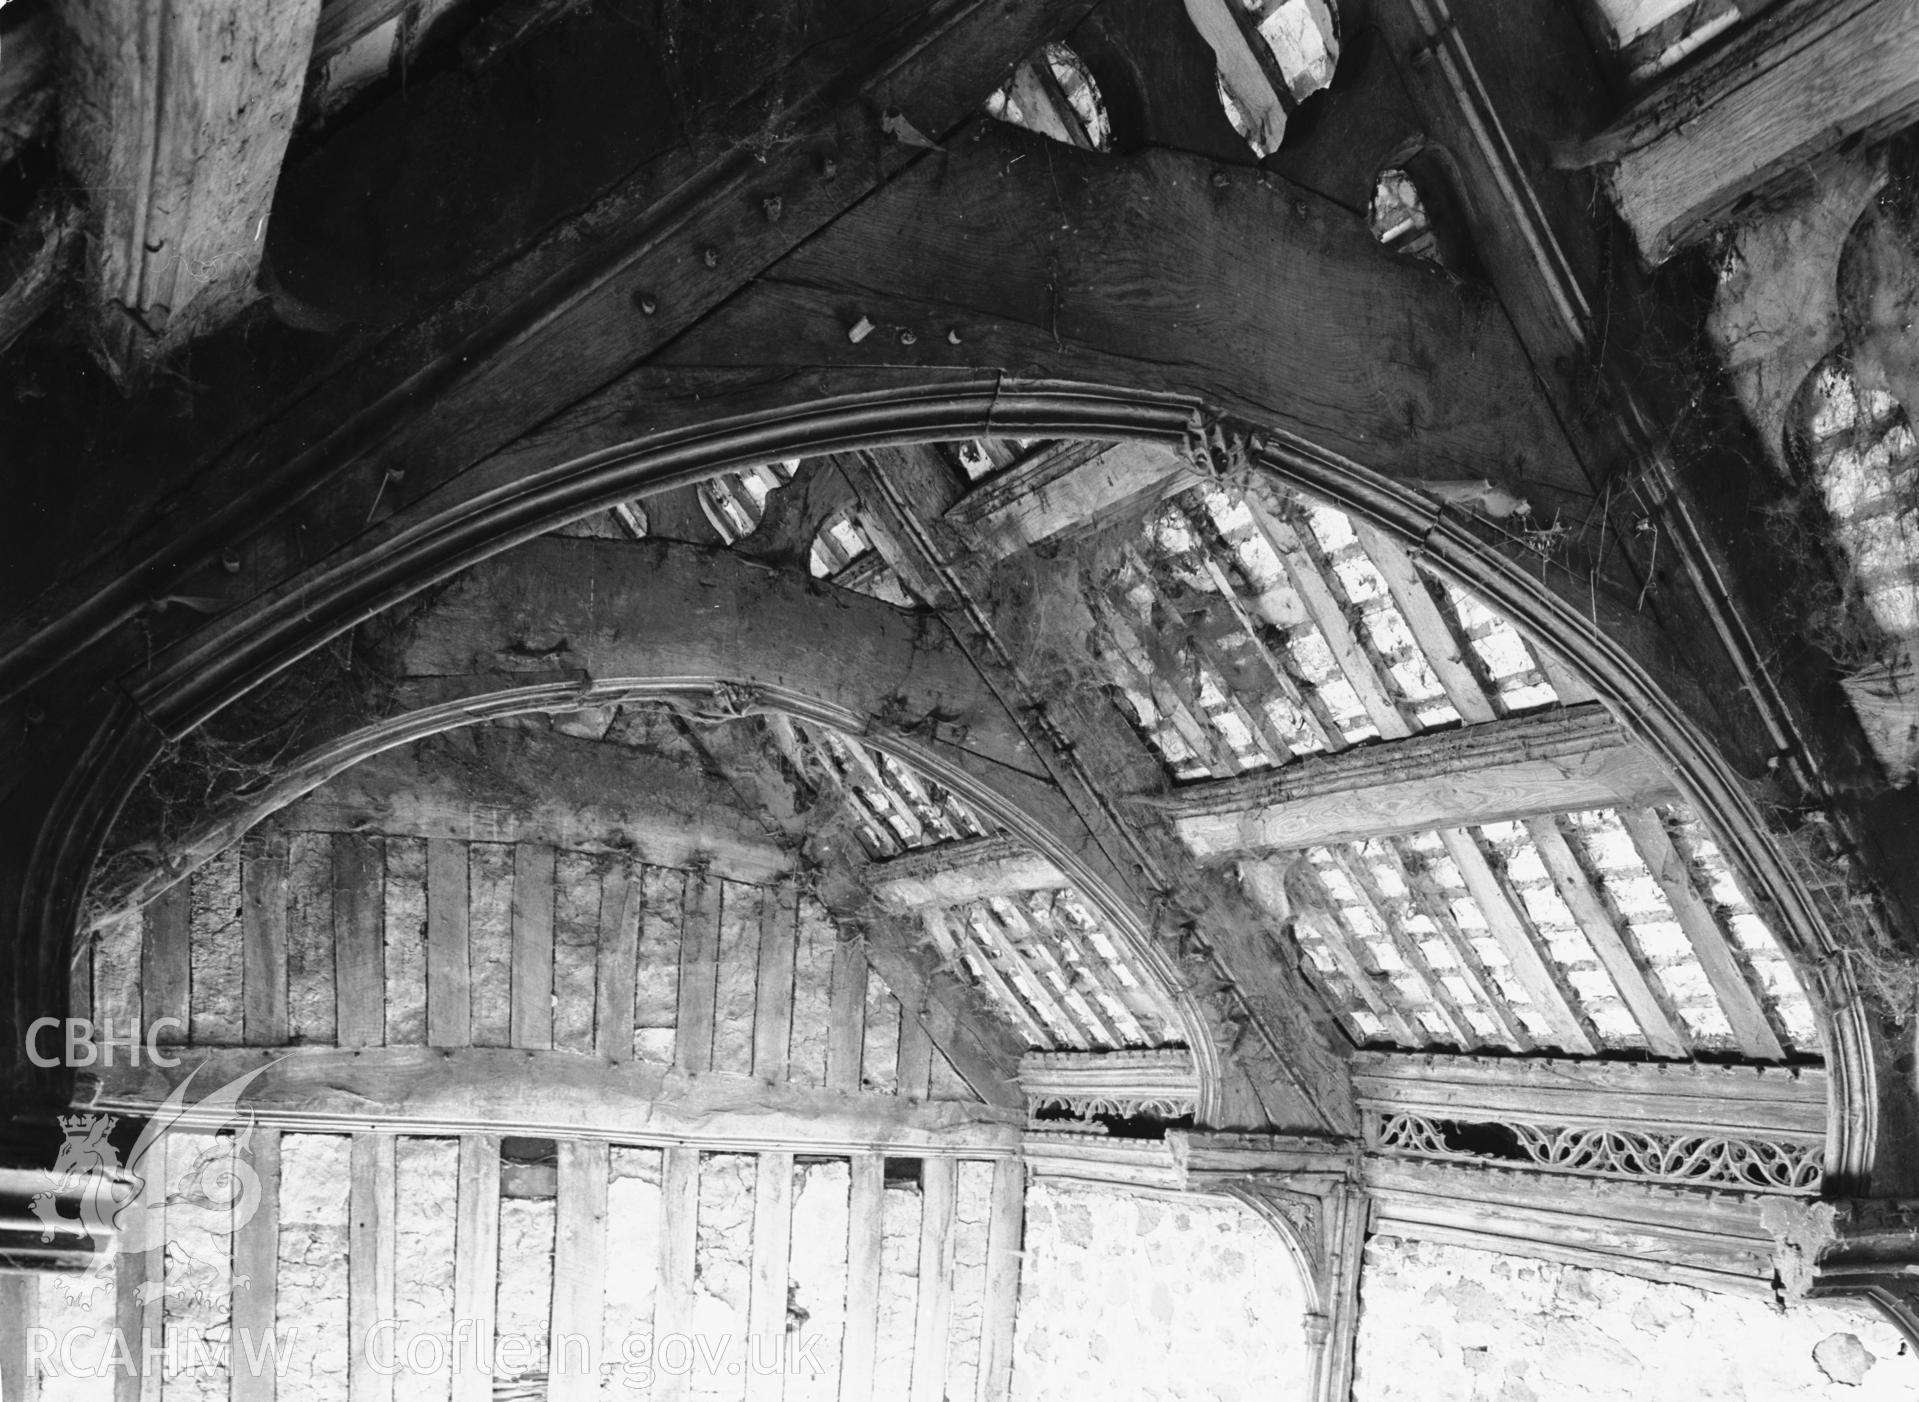 Interior view showing the hammer-beam roof looking north-east.